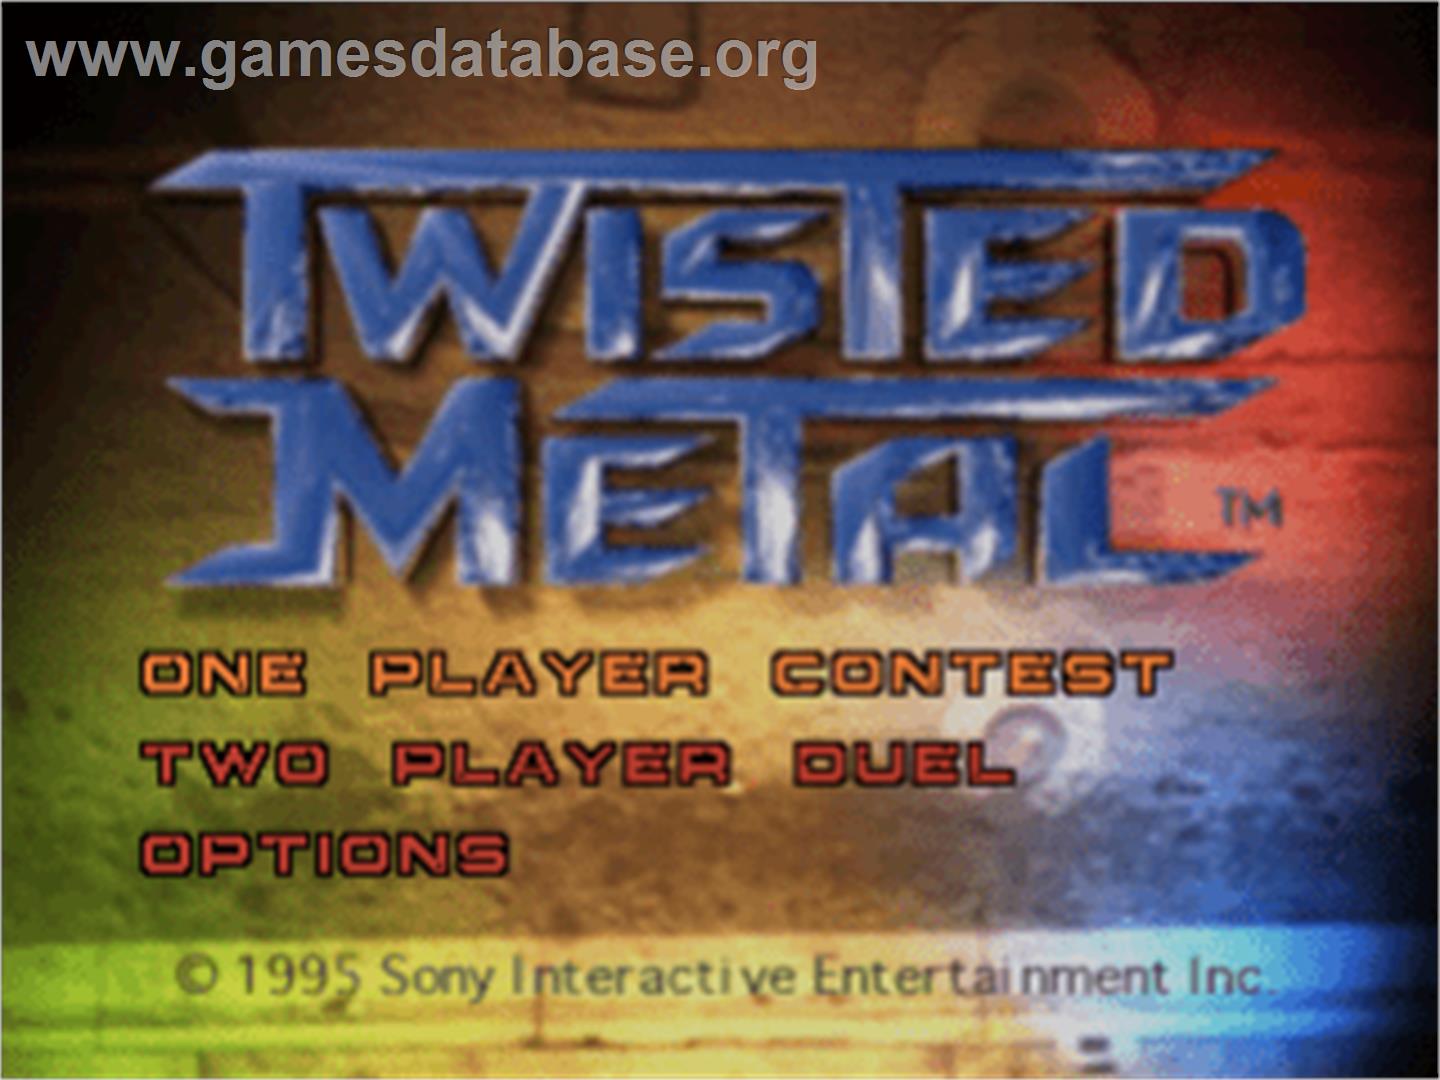 Twisted Metal - Sony Playstation - Artwork - Title Screen